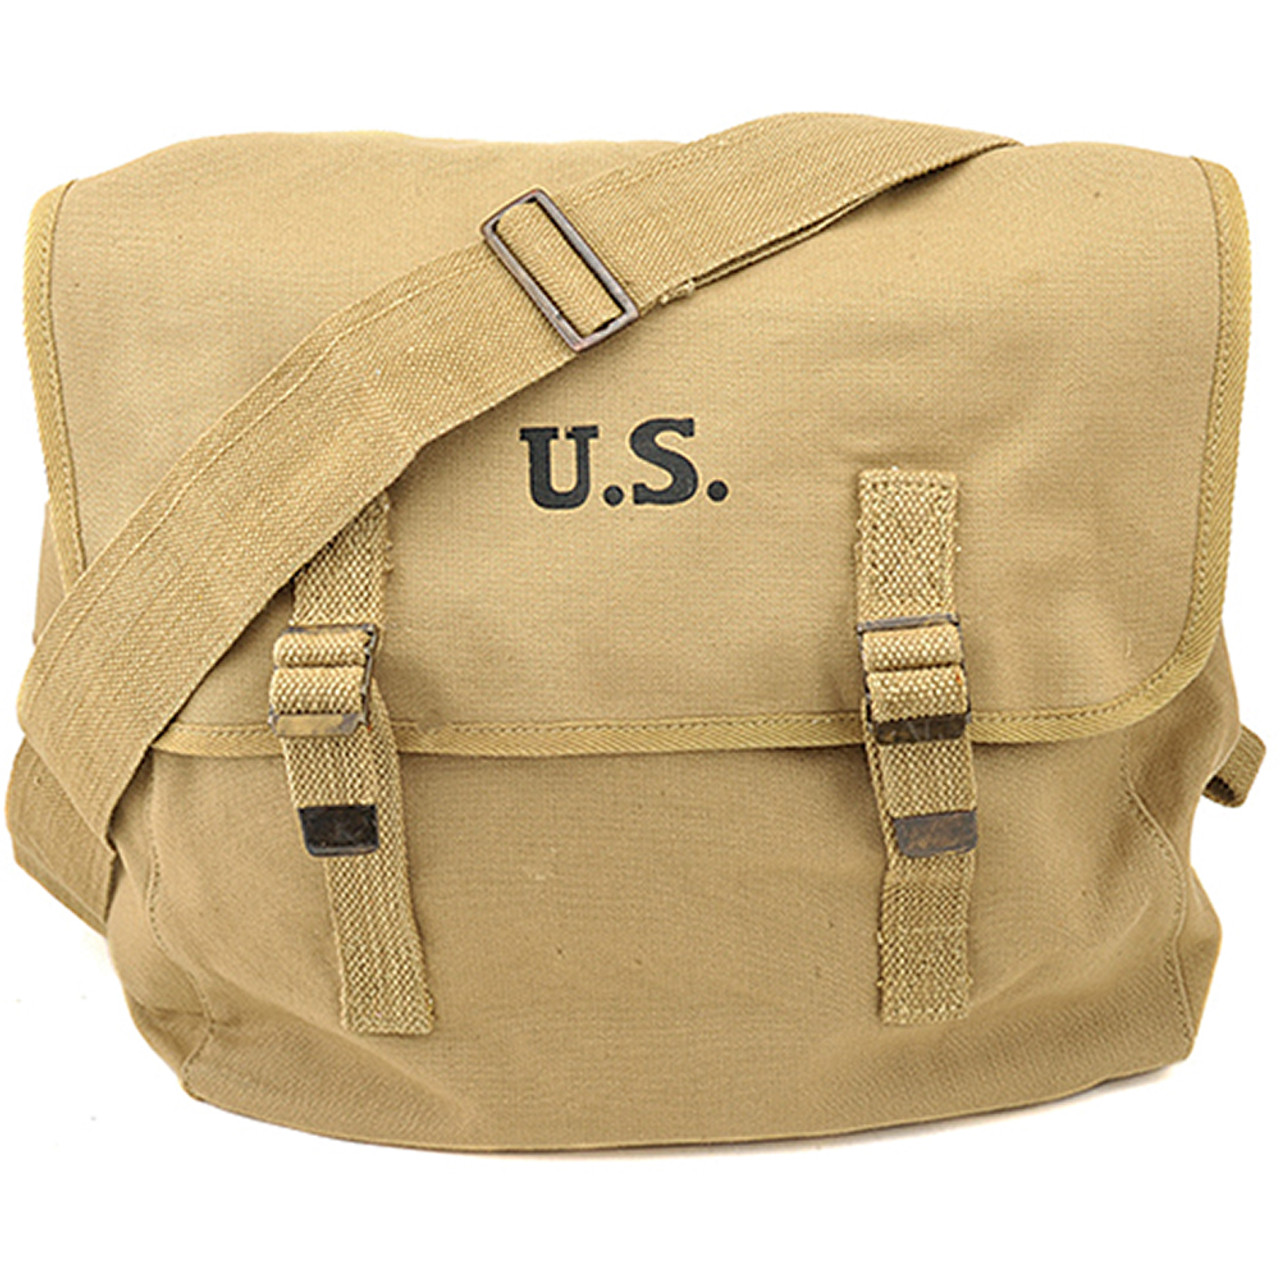 ANQIAO WW2 M1936 Musette US Backpack Canvas Bag WWII Haversack